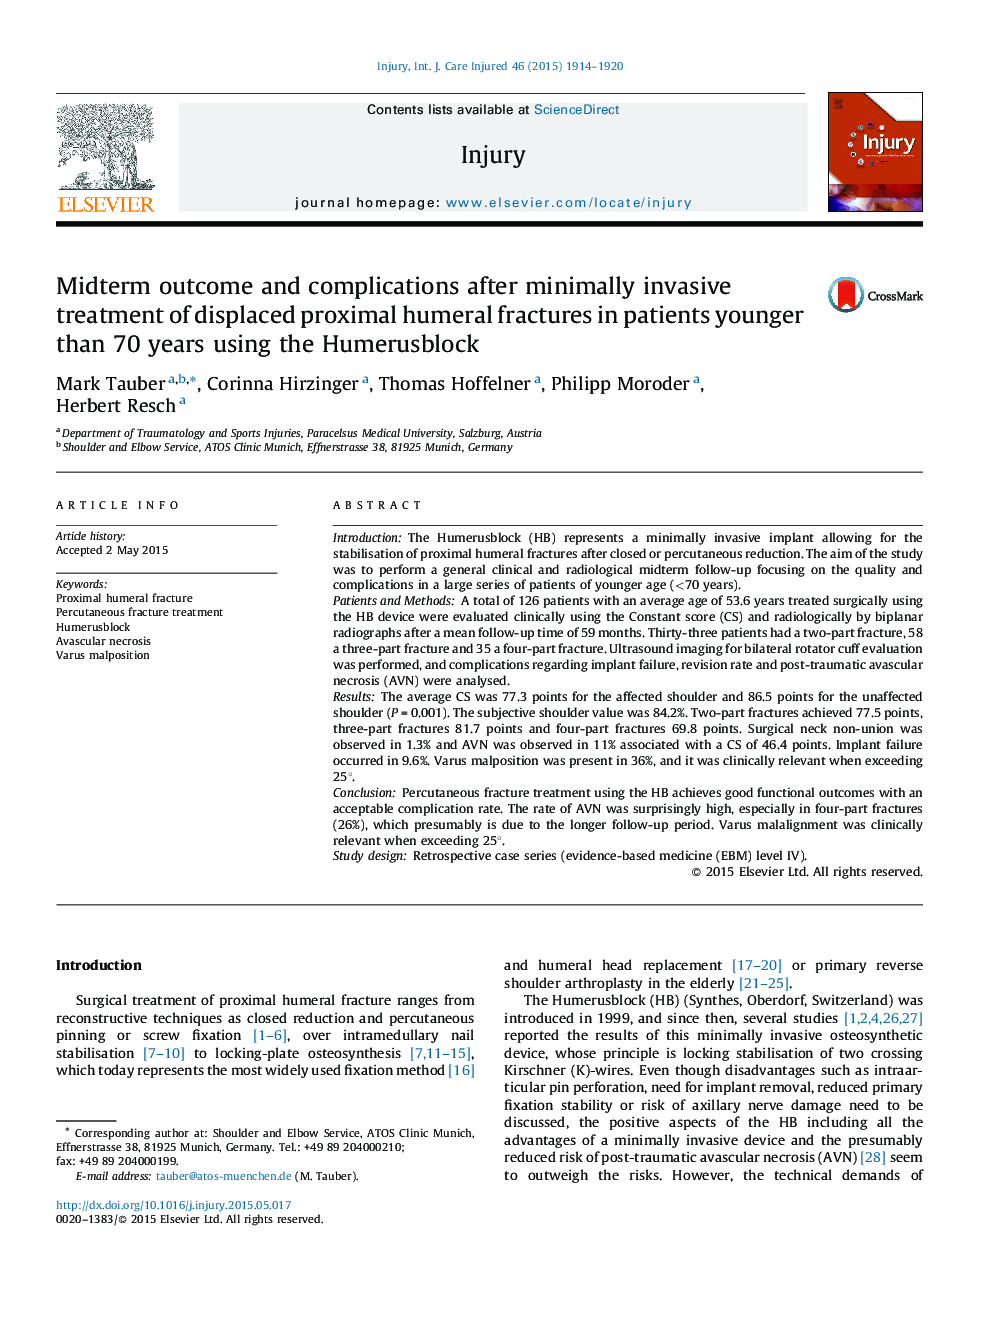 Midterm outcome and complications after minimally invasive treatment of displaced proximal humeral fractures in patients younger than 70 years using the Humerusblock